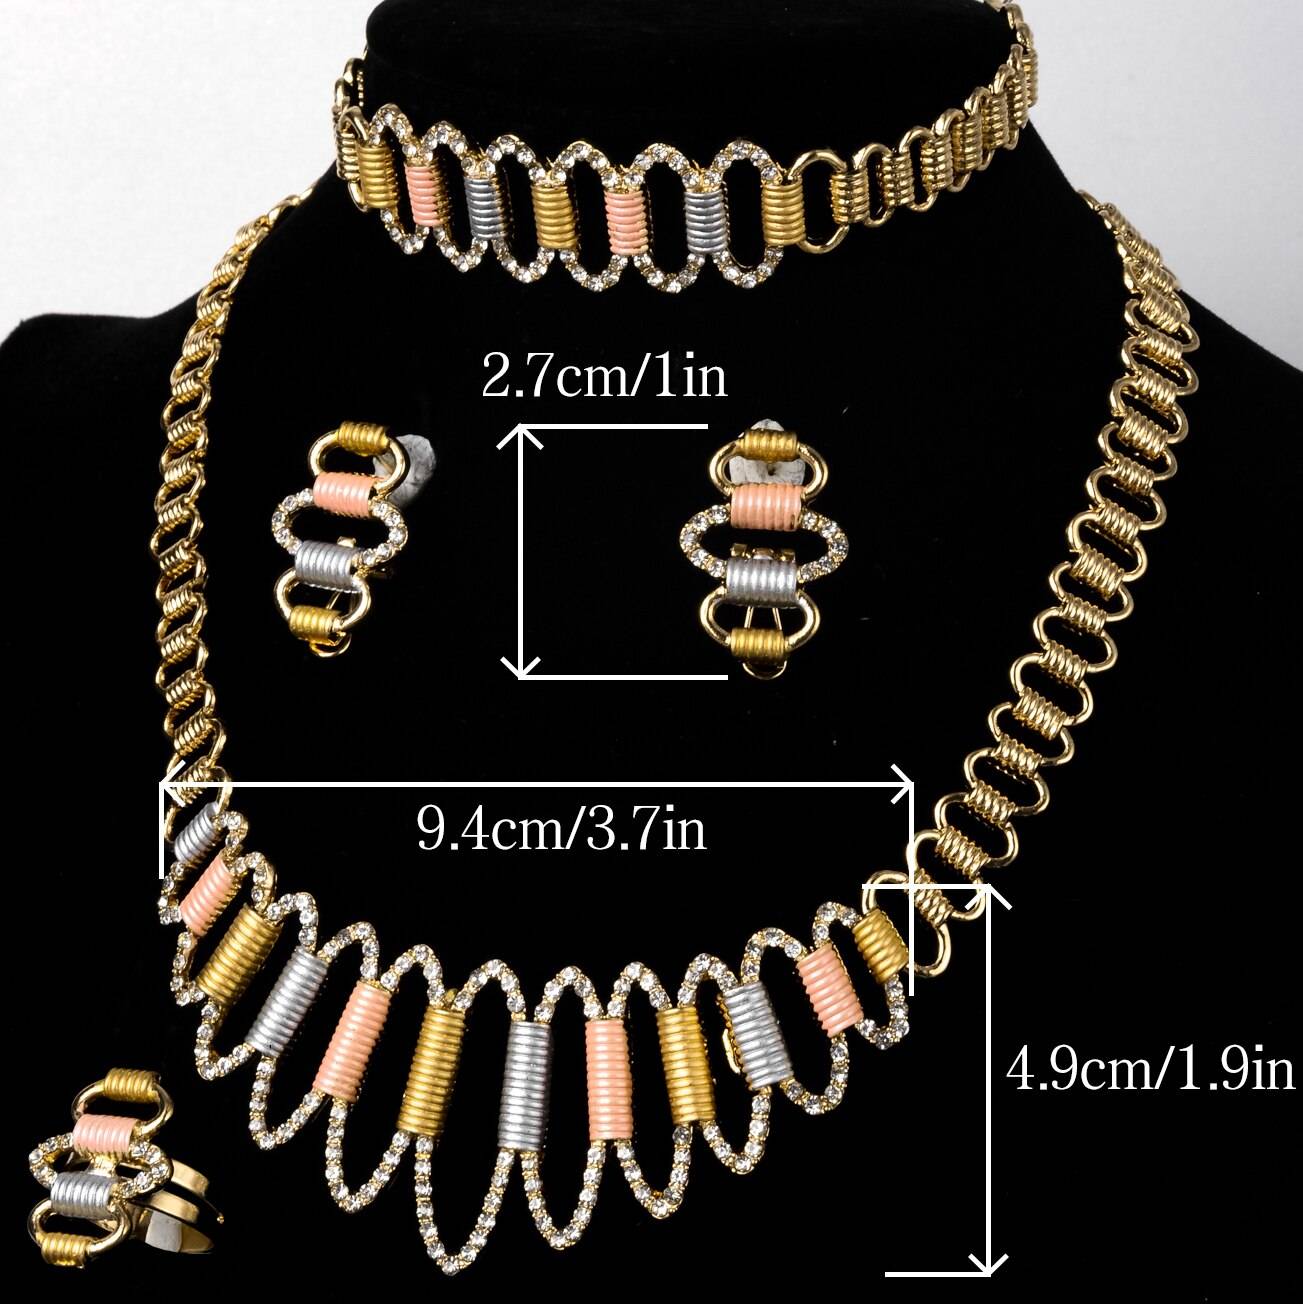 Sunny Jewelry Sets Three Tone Bohemia Bridal Wedding Earrings Necklace Bracelet Ring For Women Lady Cute Romantic Party Gift Wedding Jewellery Set 8d255f28538fbae46aeae7: Jewelry Sets